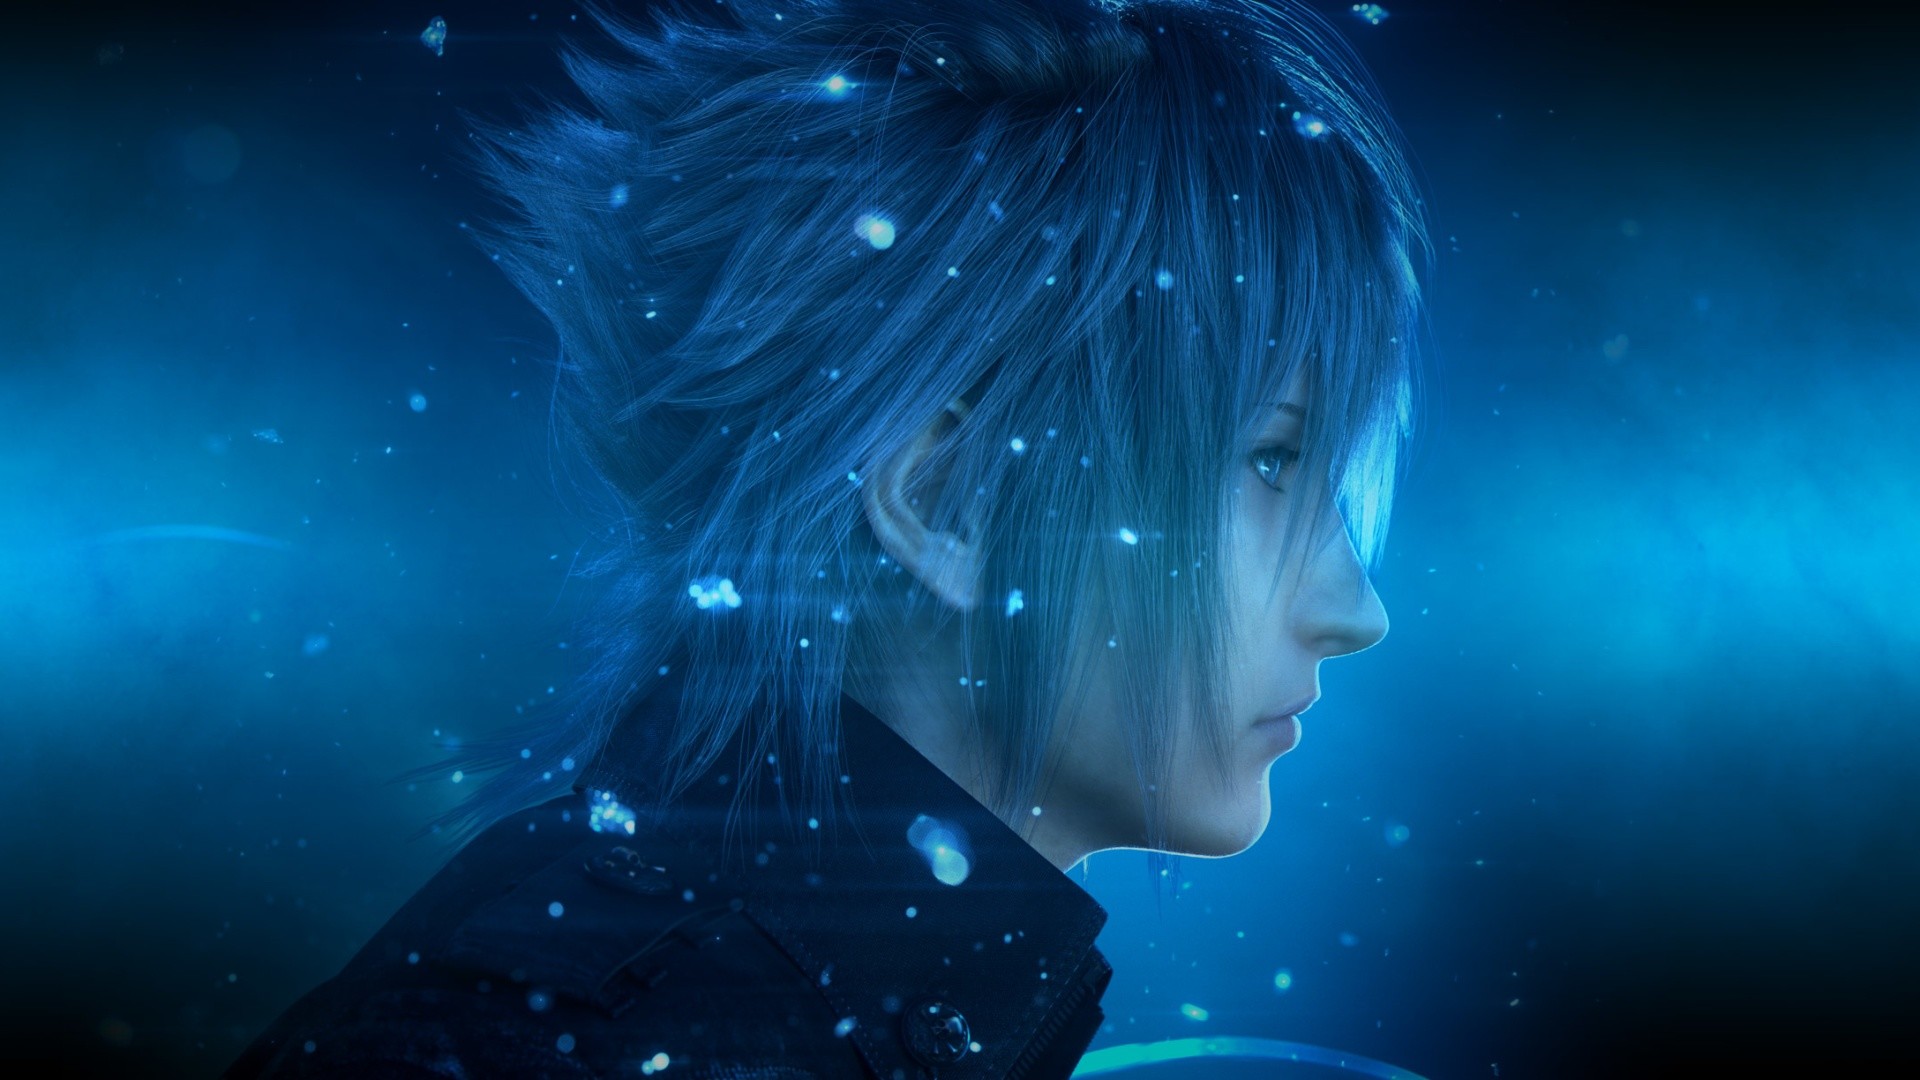 1920x1080 FFXV Wallpapers